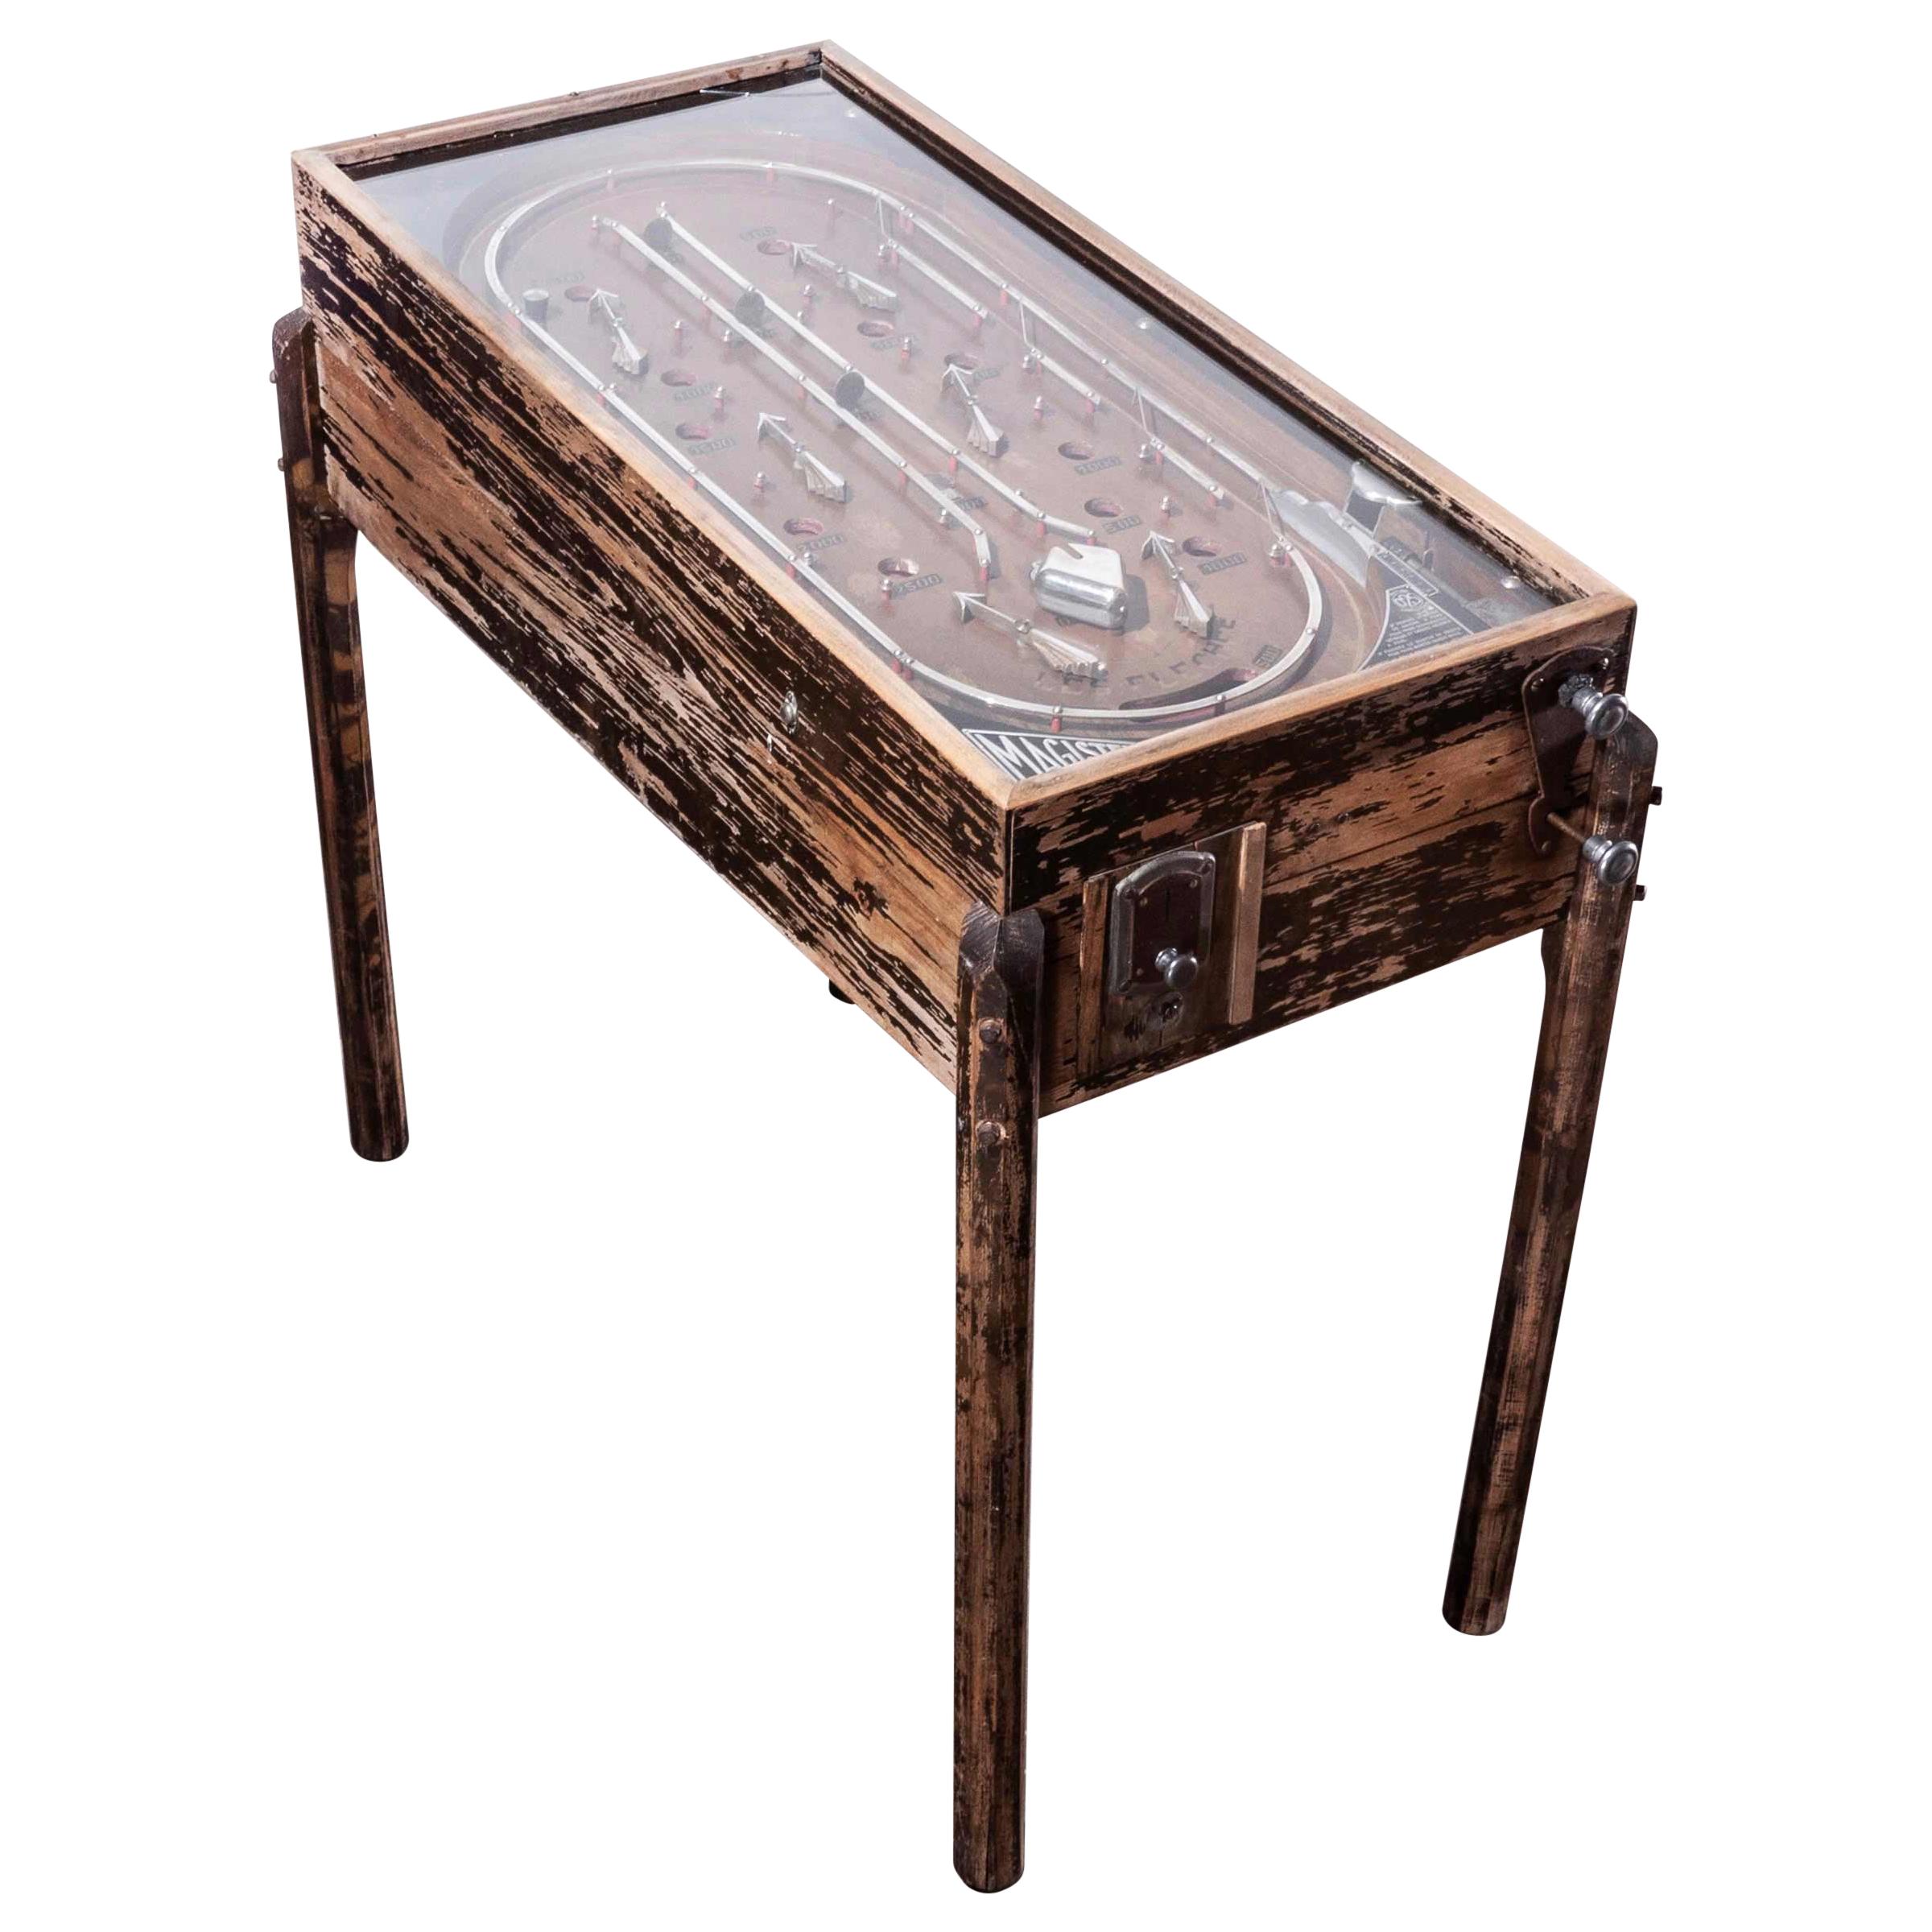 1930s Original Working French Magister Pinball Table, Les Fleches